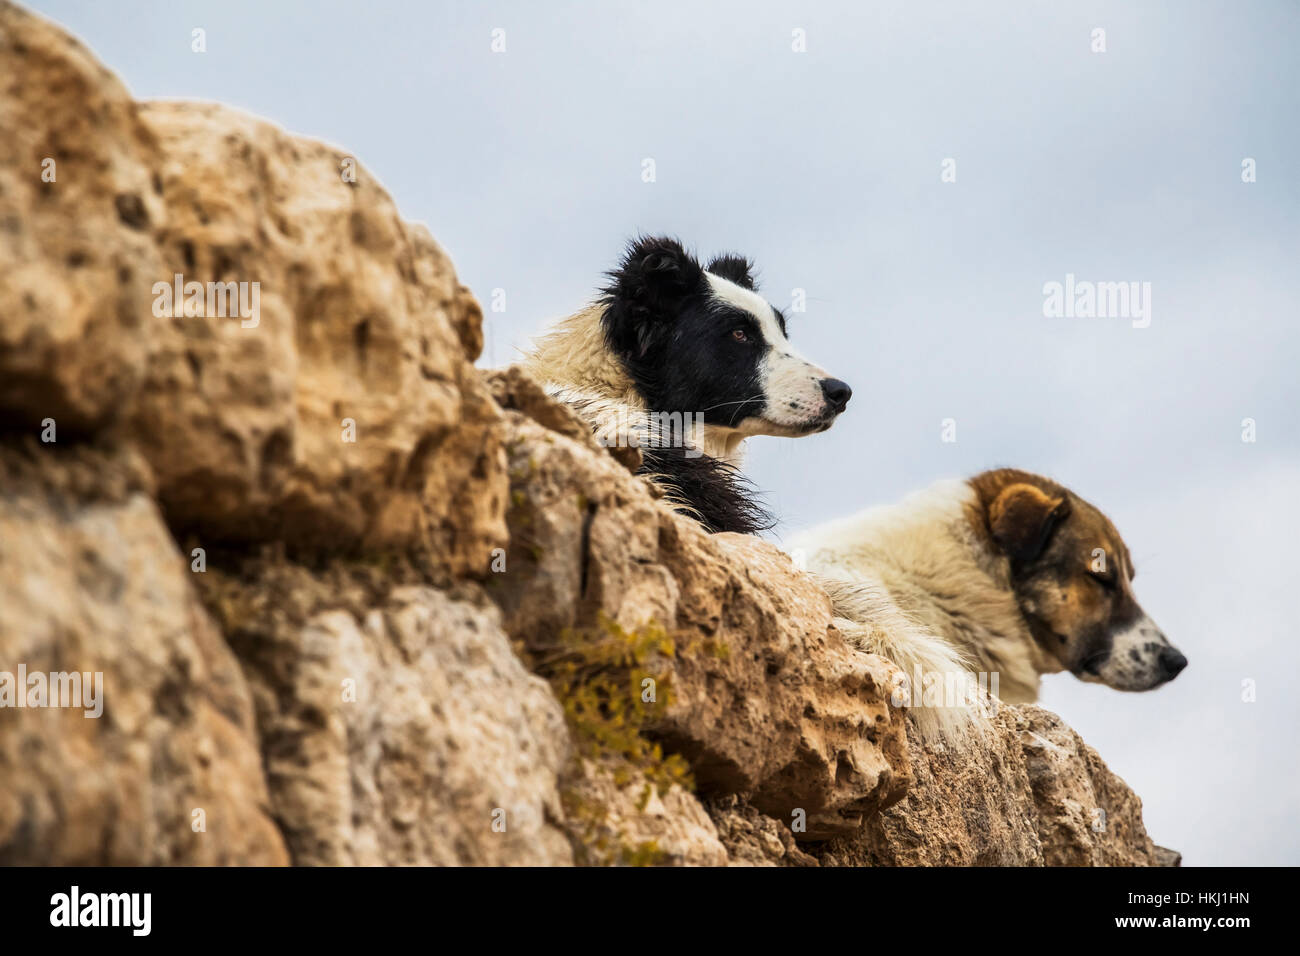 Dogs sitting on a rocky ledge looking out, Takht-e Soleyman; West Azarbaijan, Iran Stock Photo